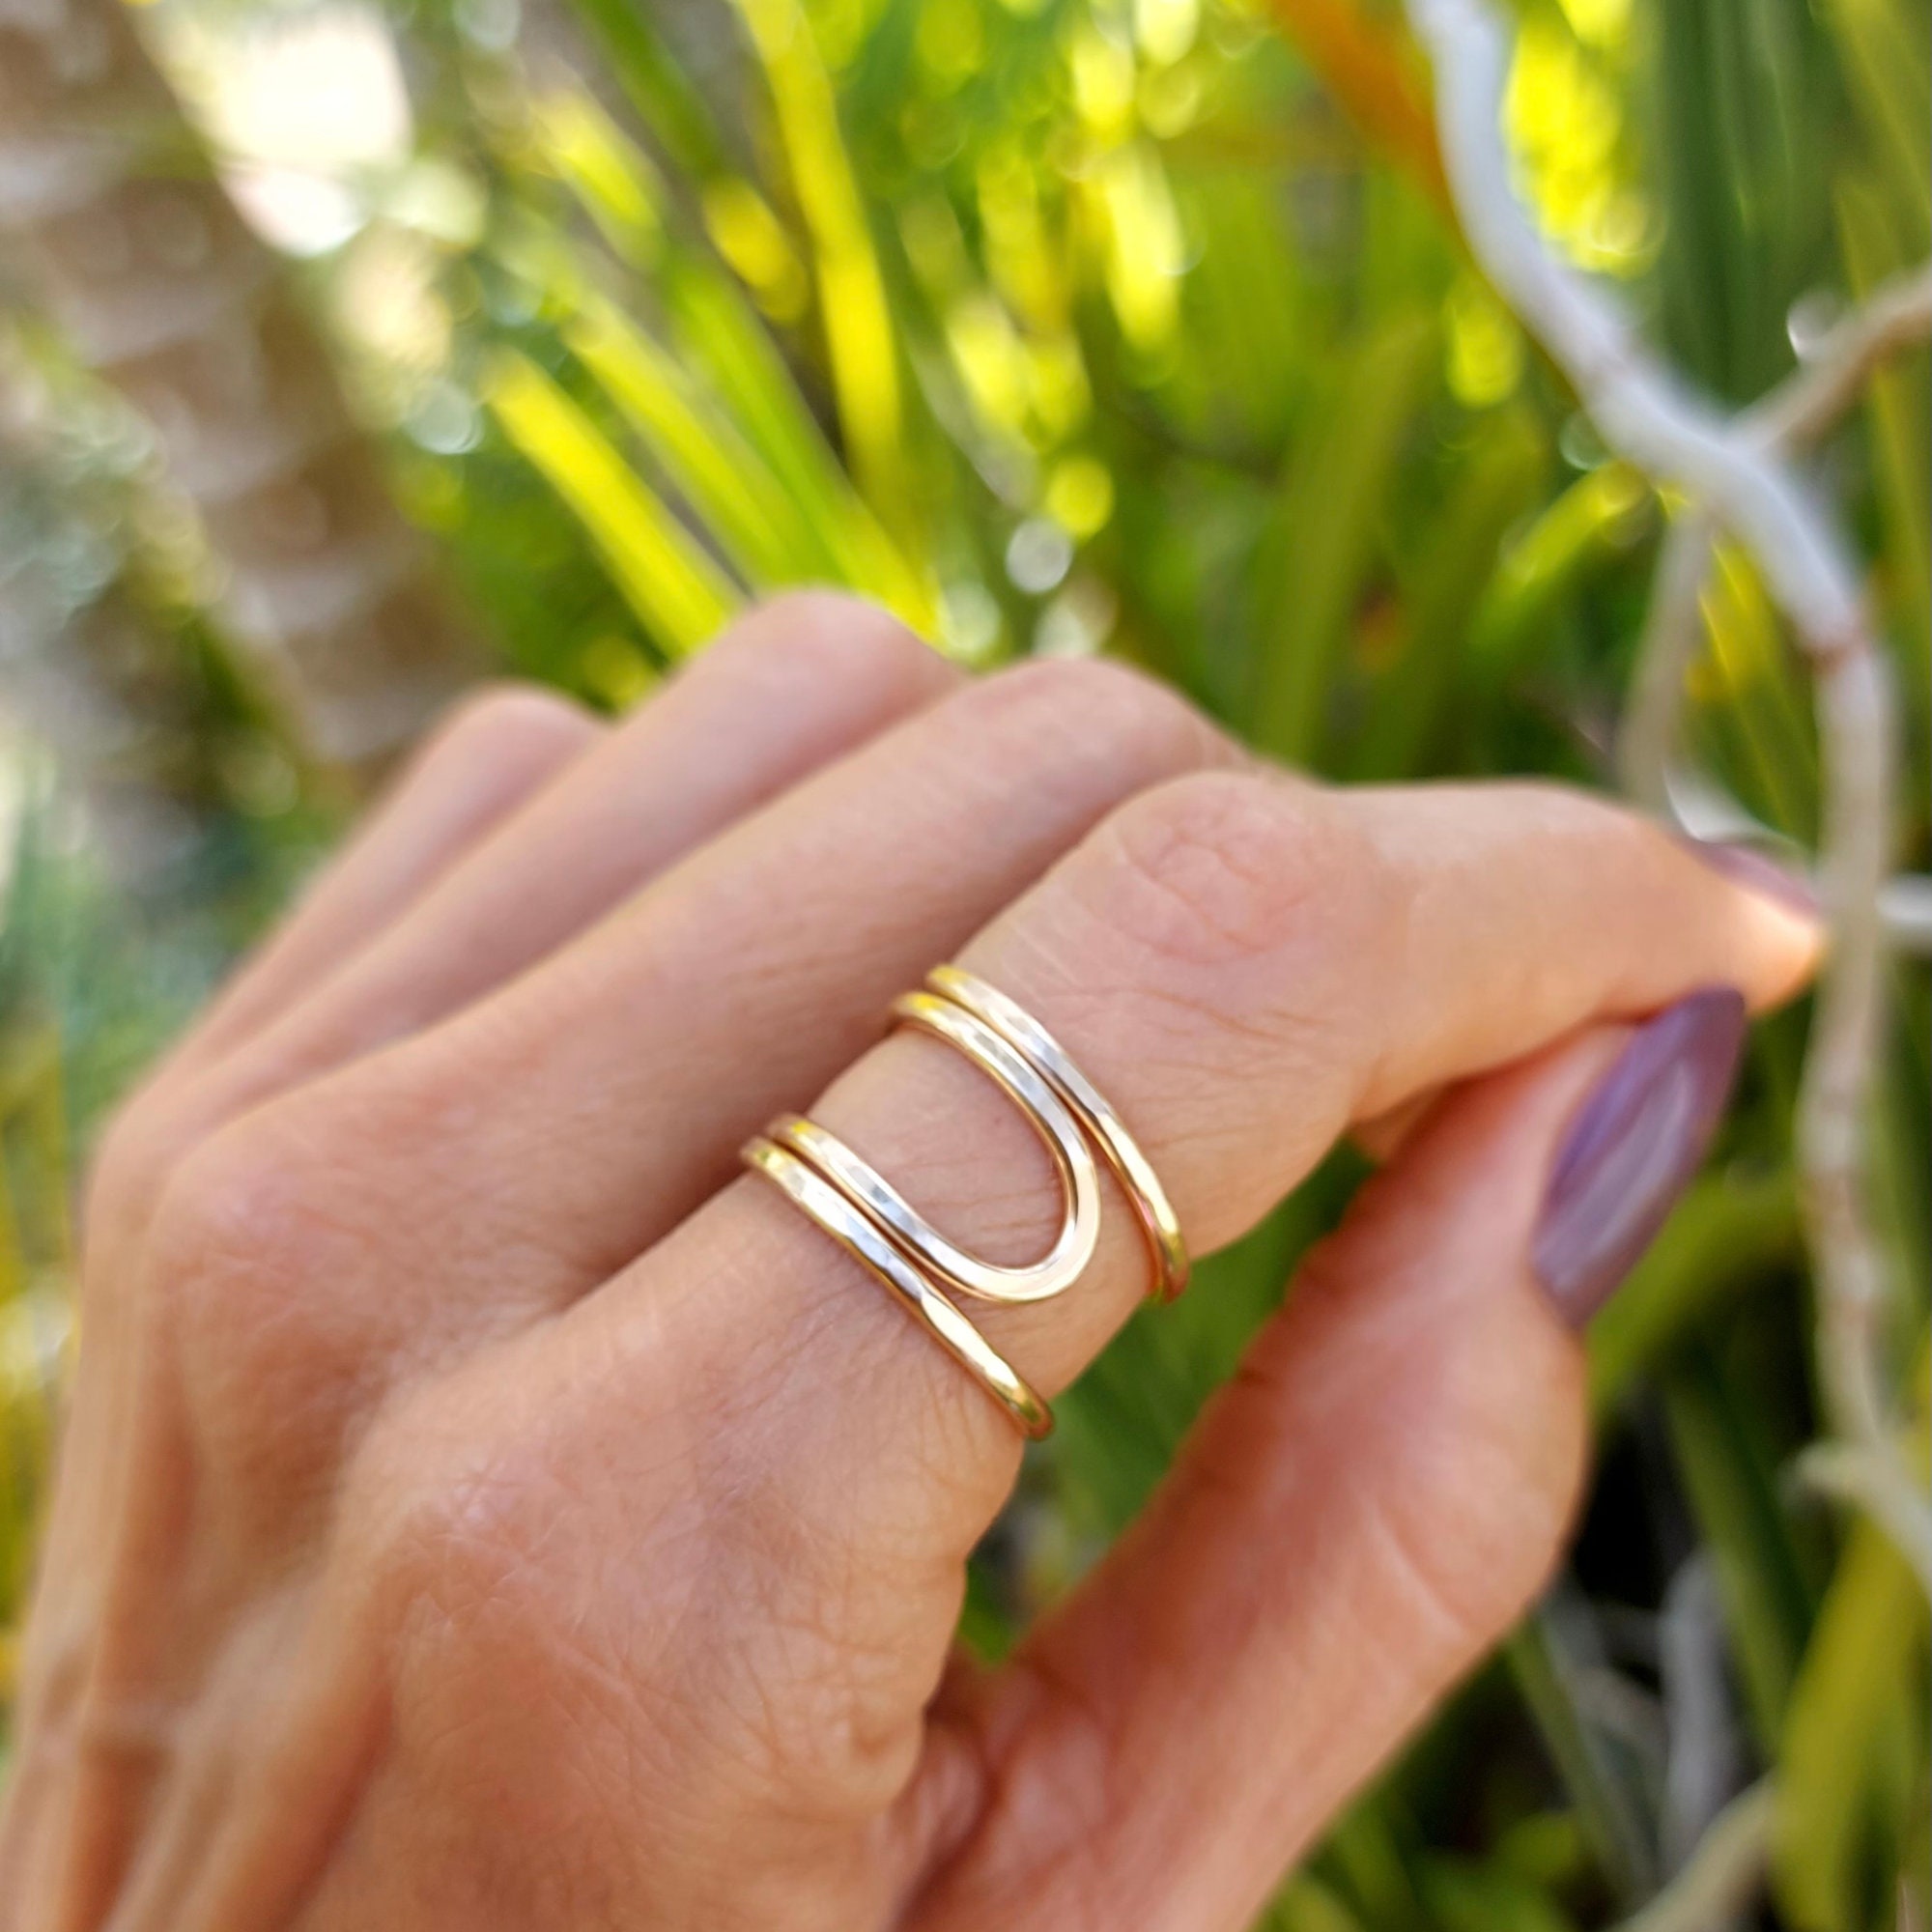 Amazon.com: Sterling Silver Rings for Women Thumb Index Finger Ring Dainty  Stackable Gold Band Plain Minimalist Ring Unisex (Gold, 7.75) : Handmade  Products